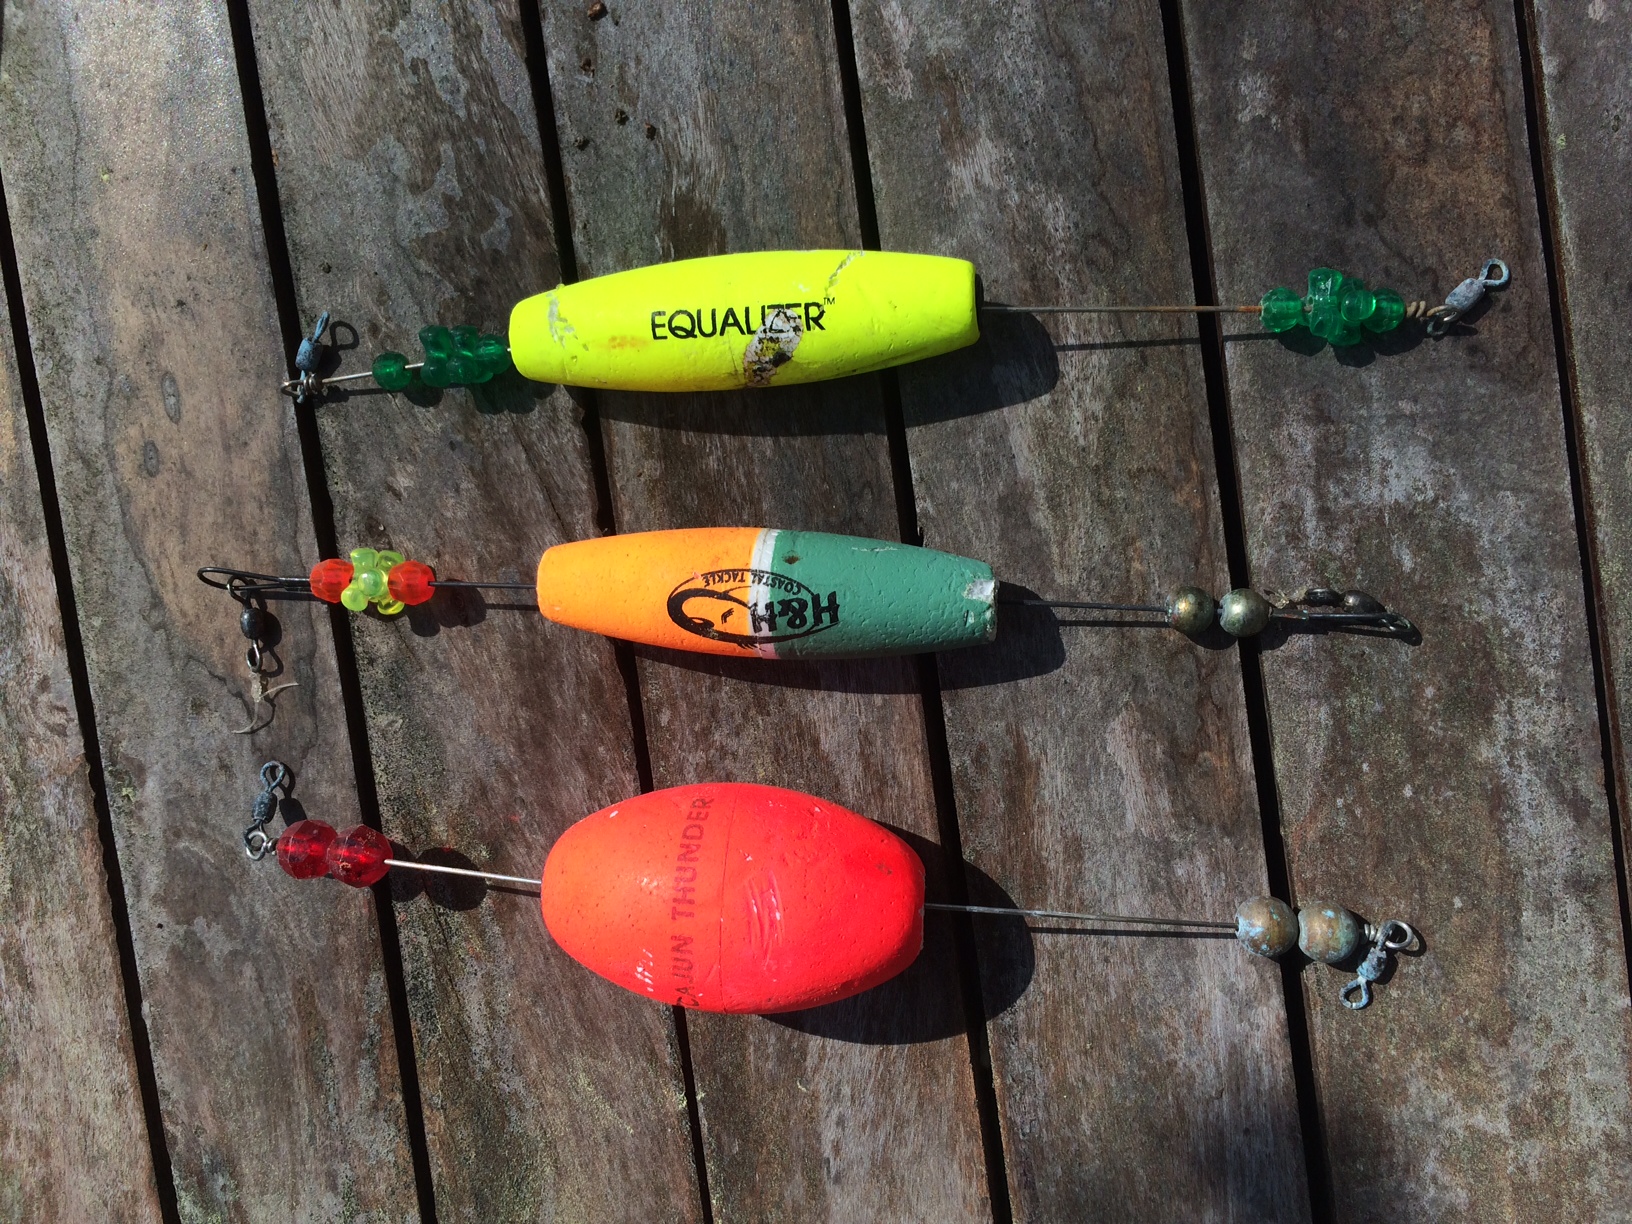 Basic Trout fishing – How to rig a Jig under a Cork.